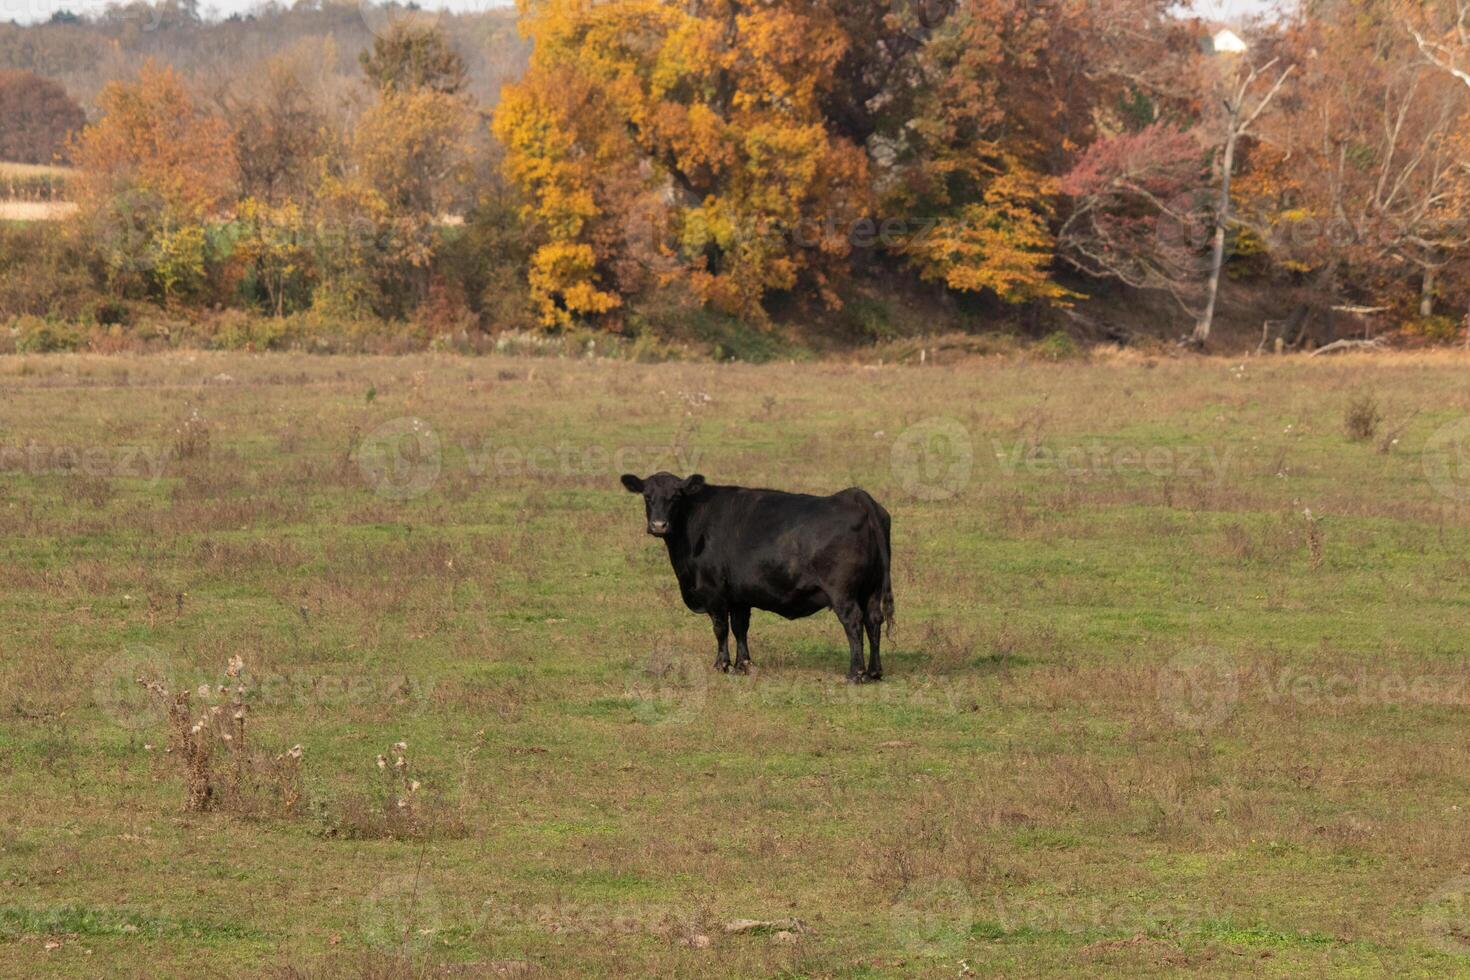 This beautiful black cow was standing in the meadow and looks to be posing. His large black body shows he is quite healthy. The green grass all around the bovine is there for them to graze. photo